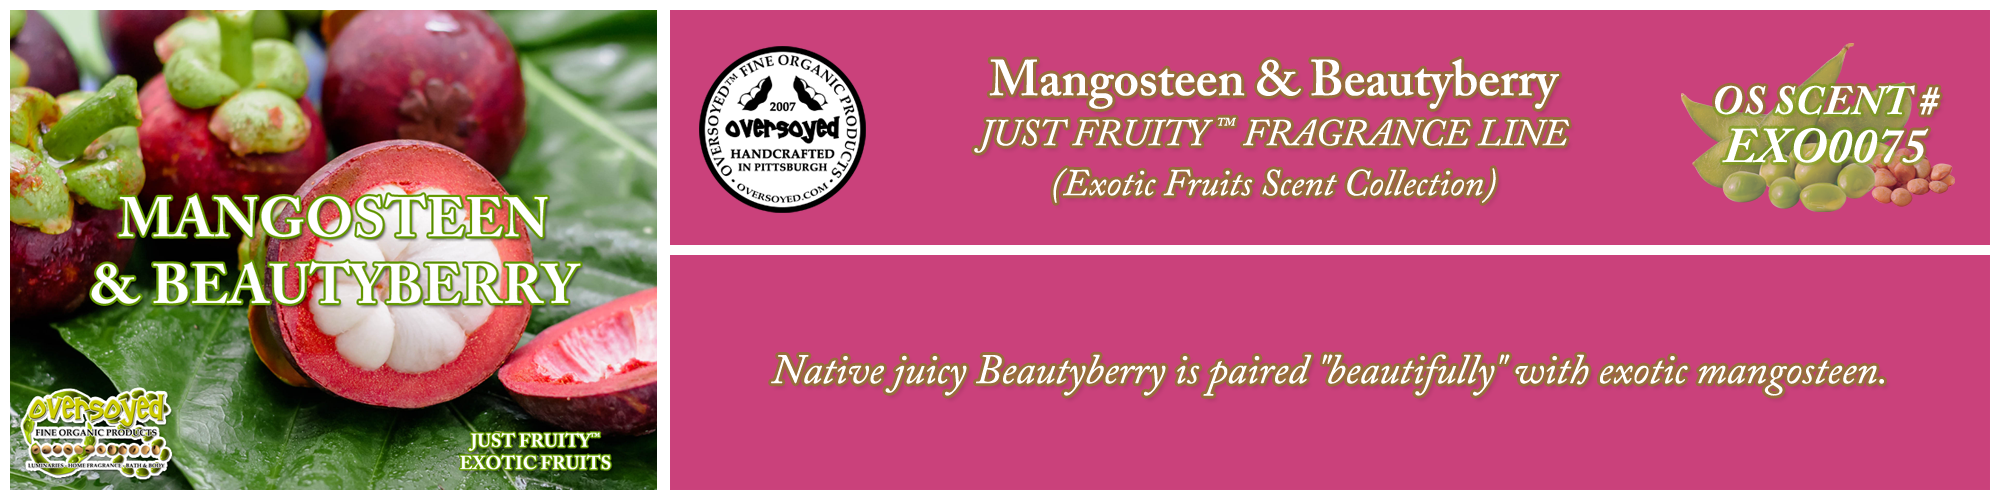 Mangosteen & Beautyberry Handcrafted Products Collection